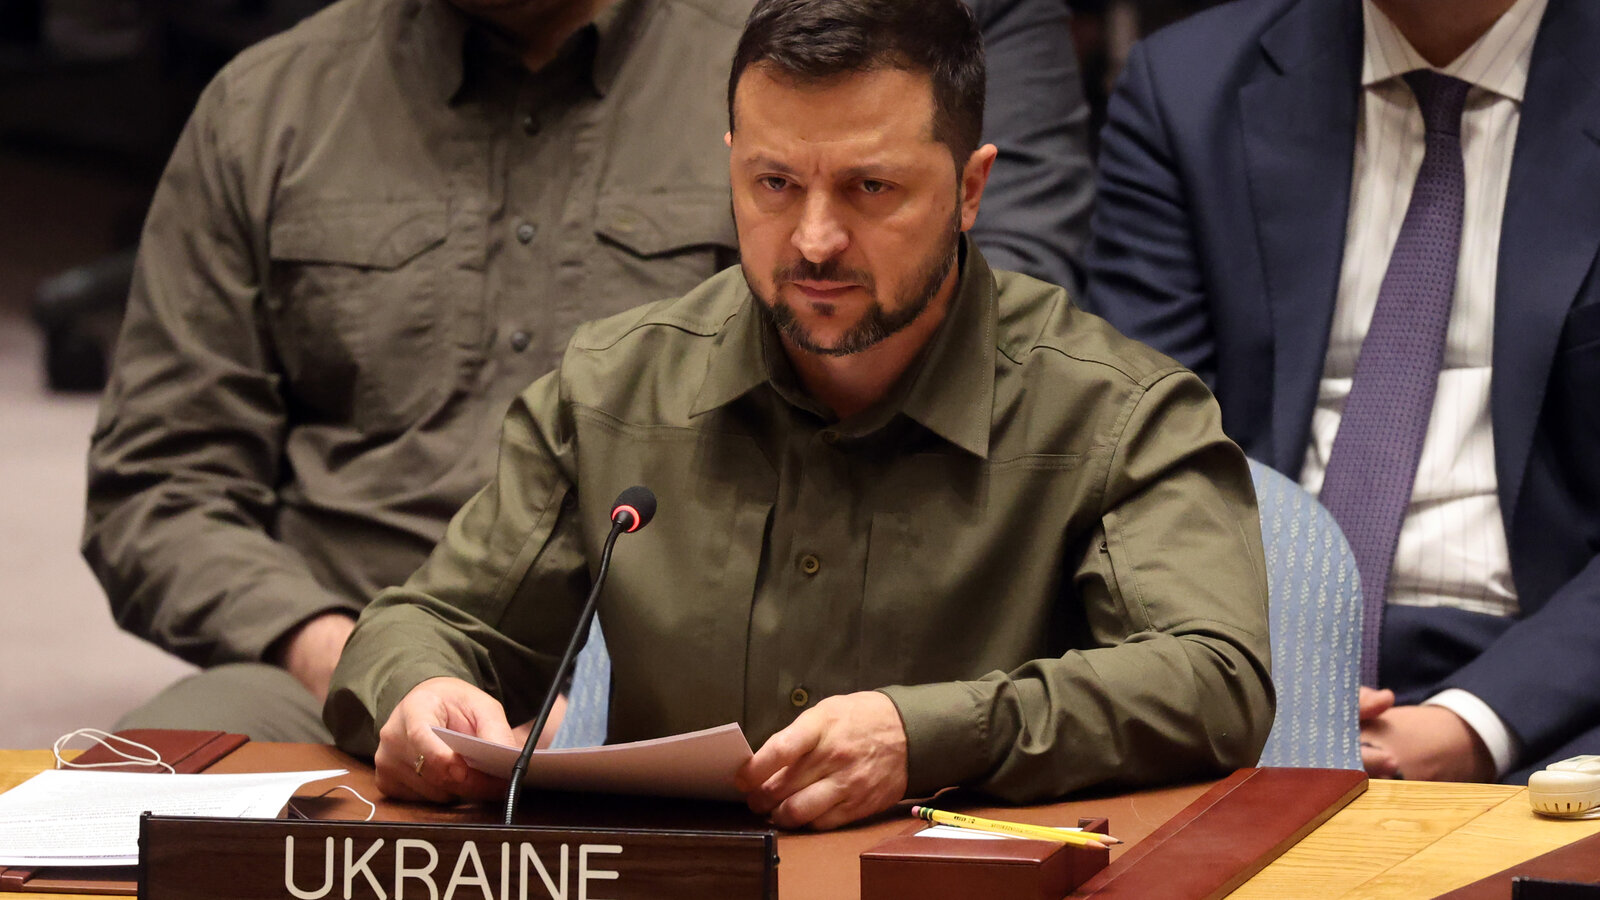 Ukrainian President Resorting to Extreme Measures: Drafting Prisoners Amid War with Russia